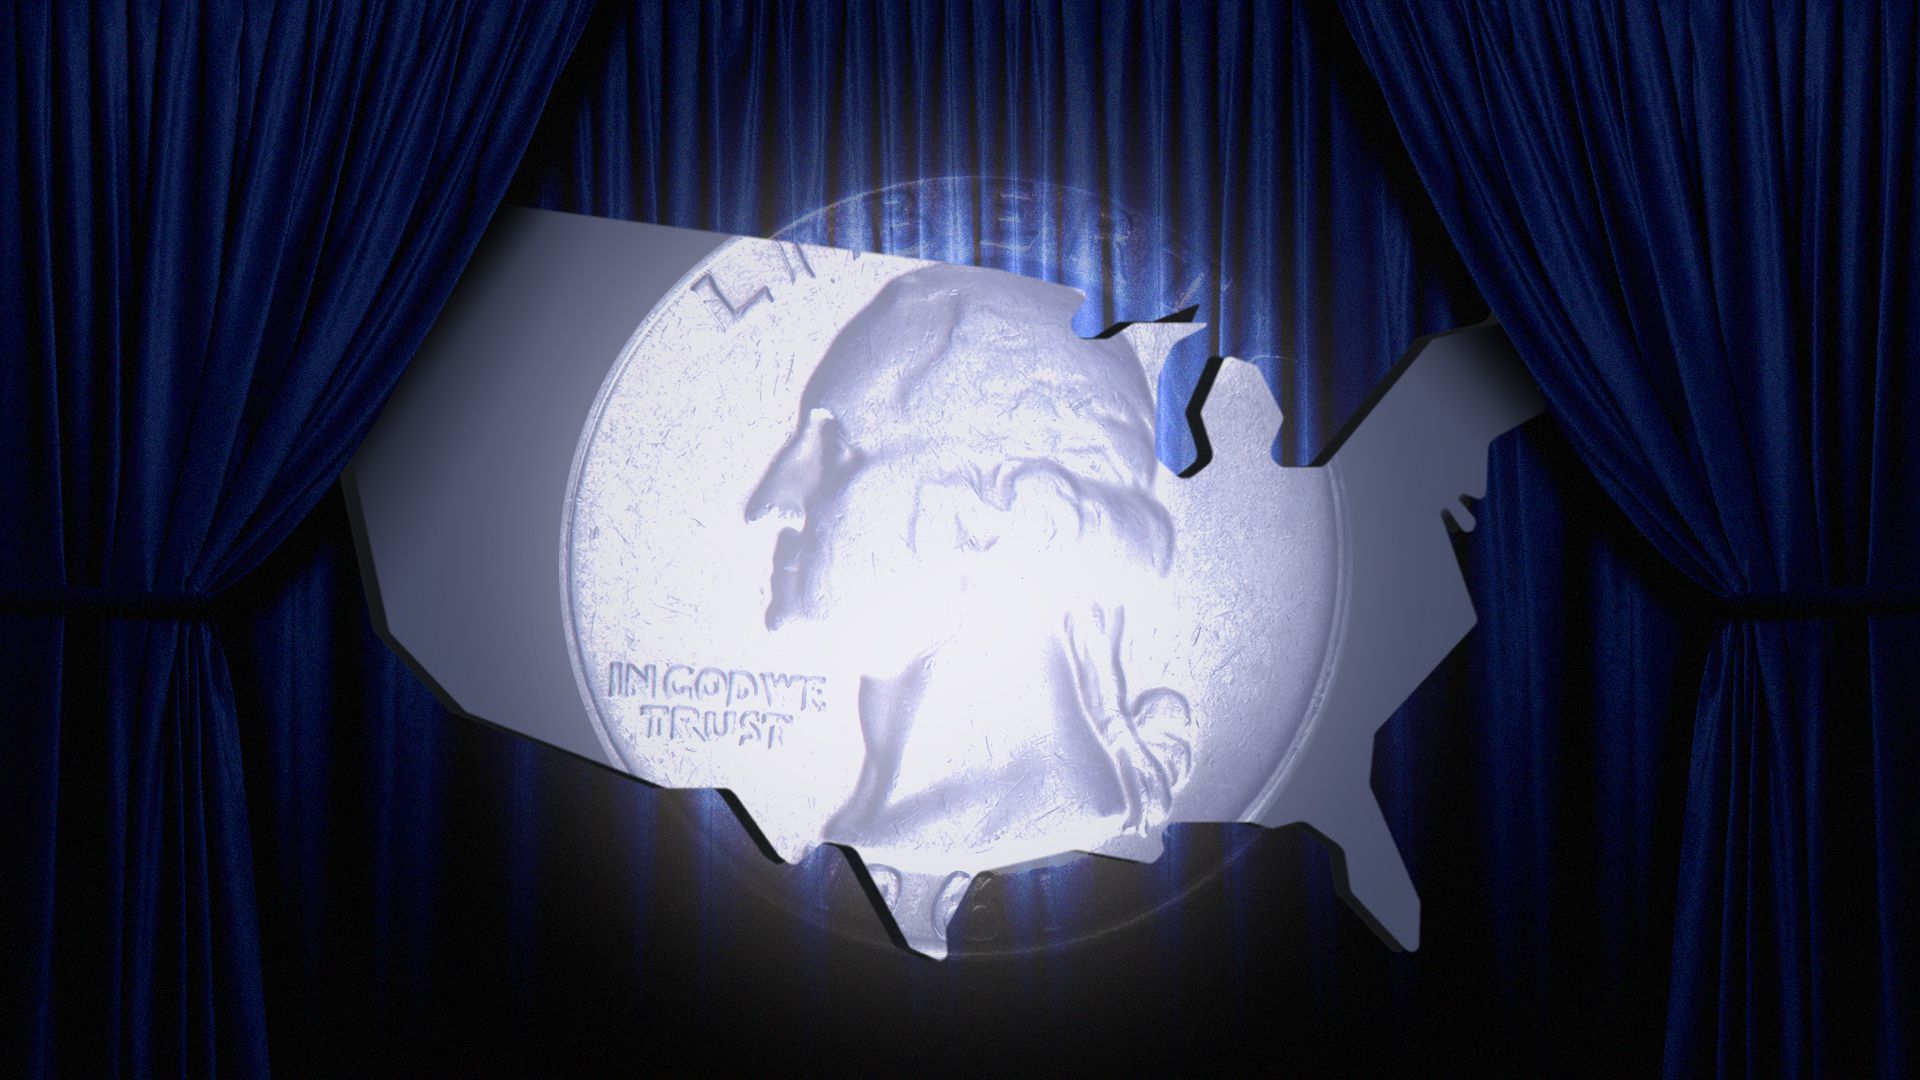 Illustration of a spotlight revealing a coin, directed onto the US